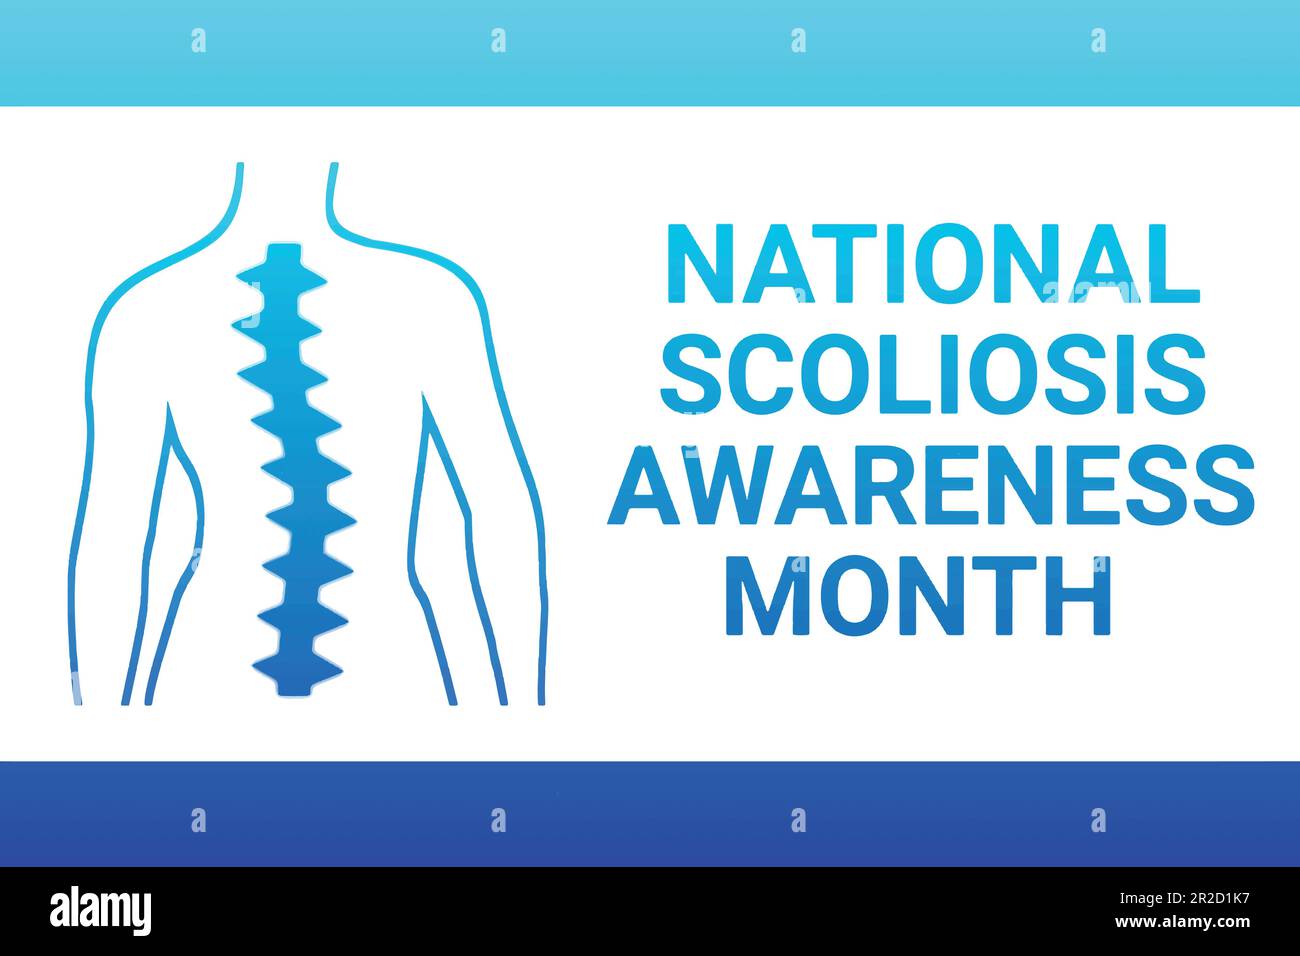 National Scoliosis Awareness Month. Holiday concept. Template for background, banner, card, poster with text inscription. Vector illustration Stock Vector